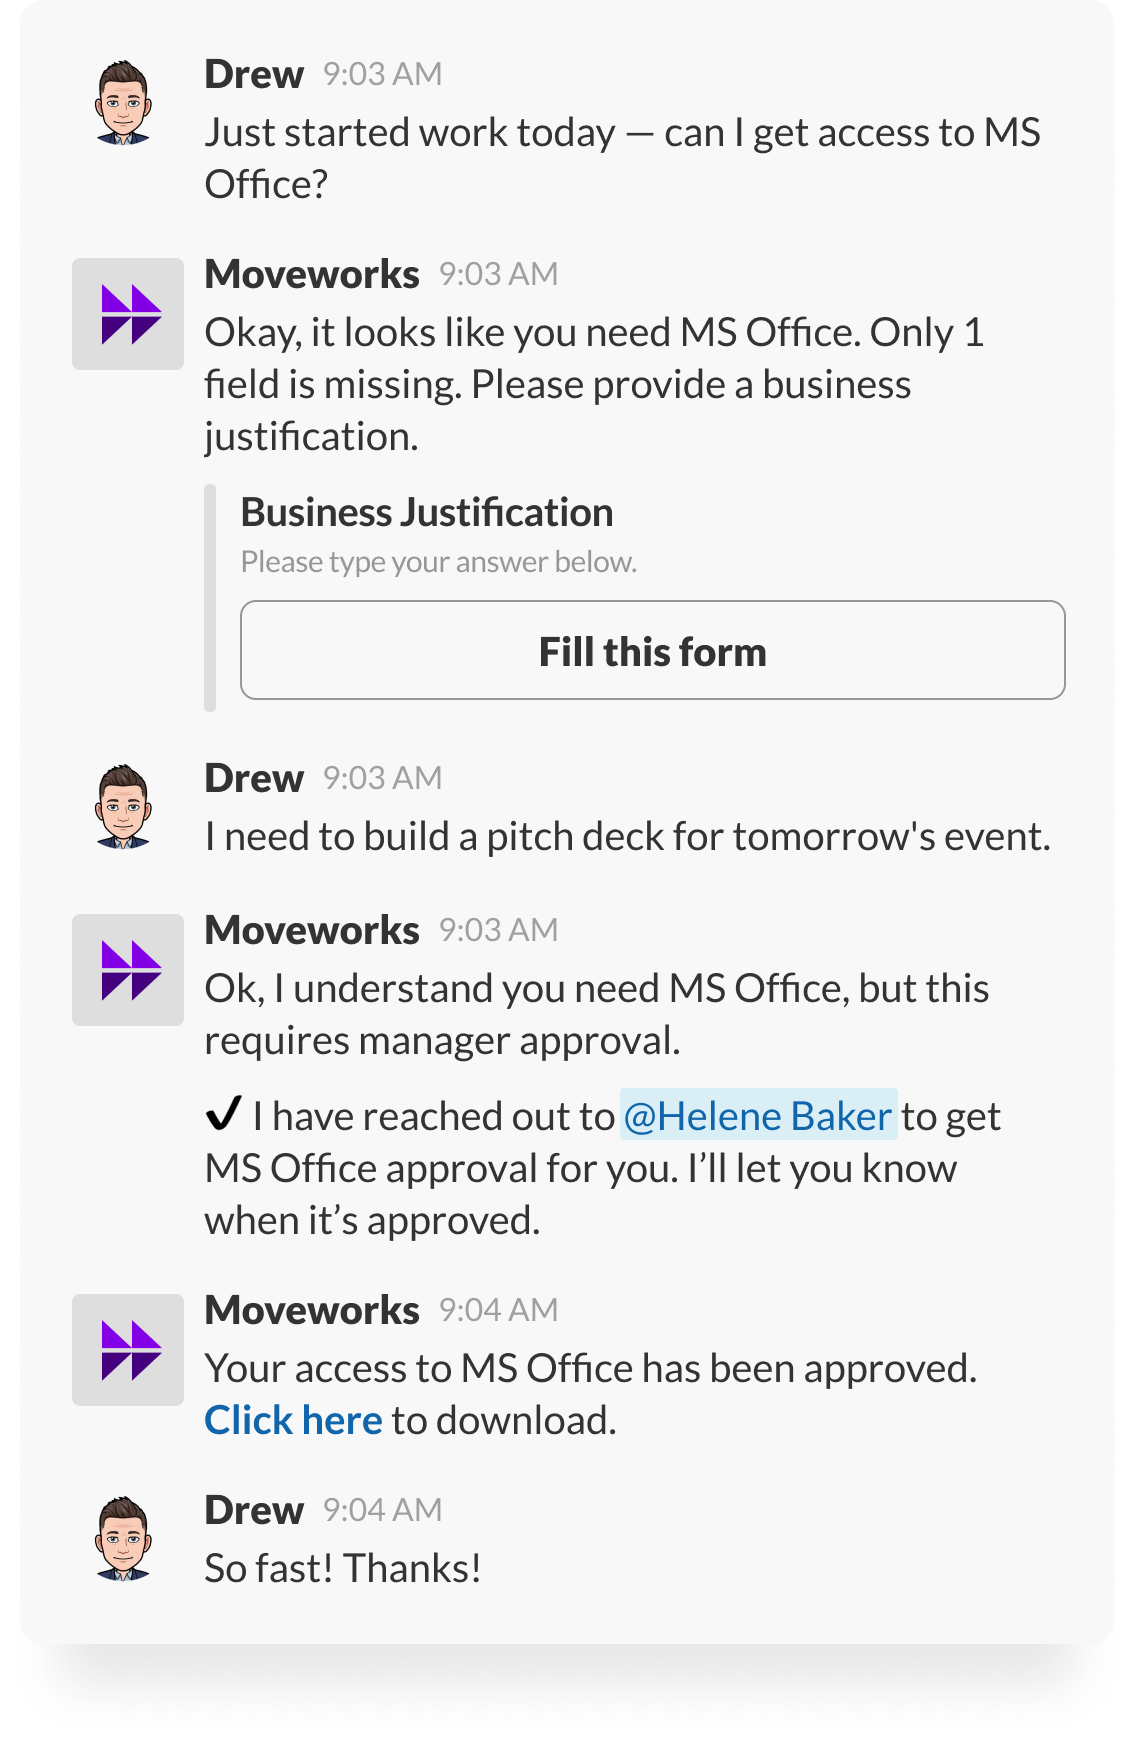 moveworks personalizes forms by automatically filling in relevant fields